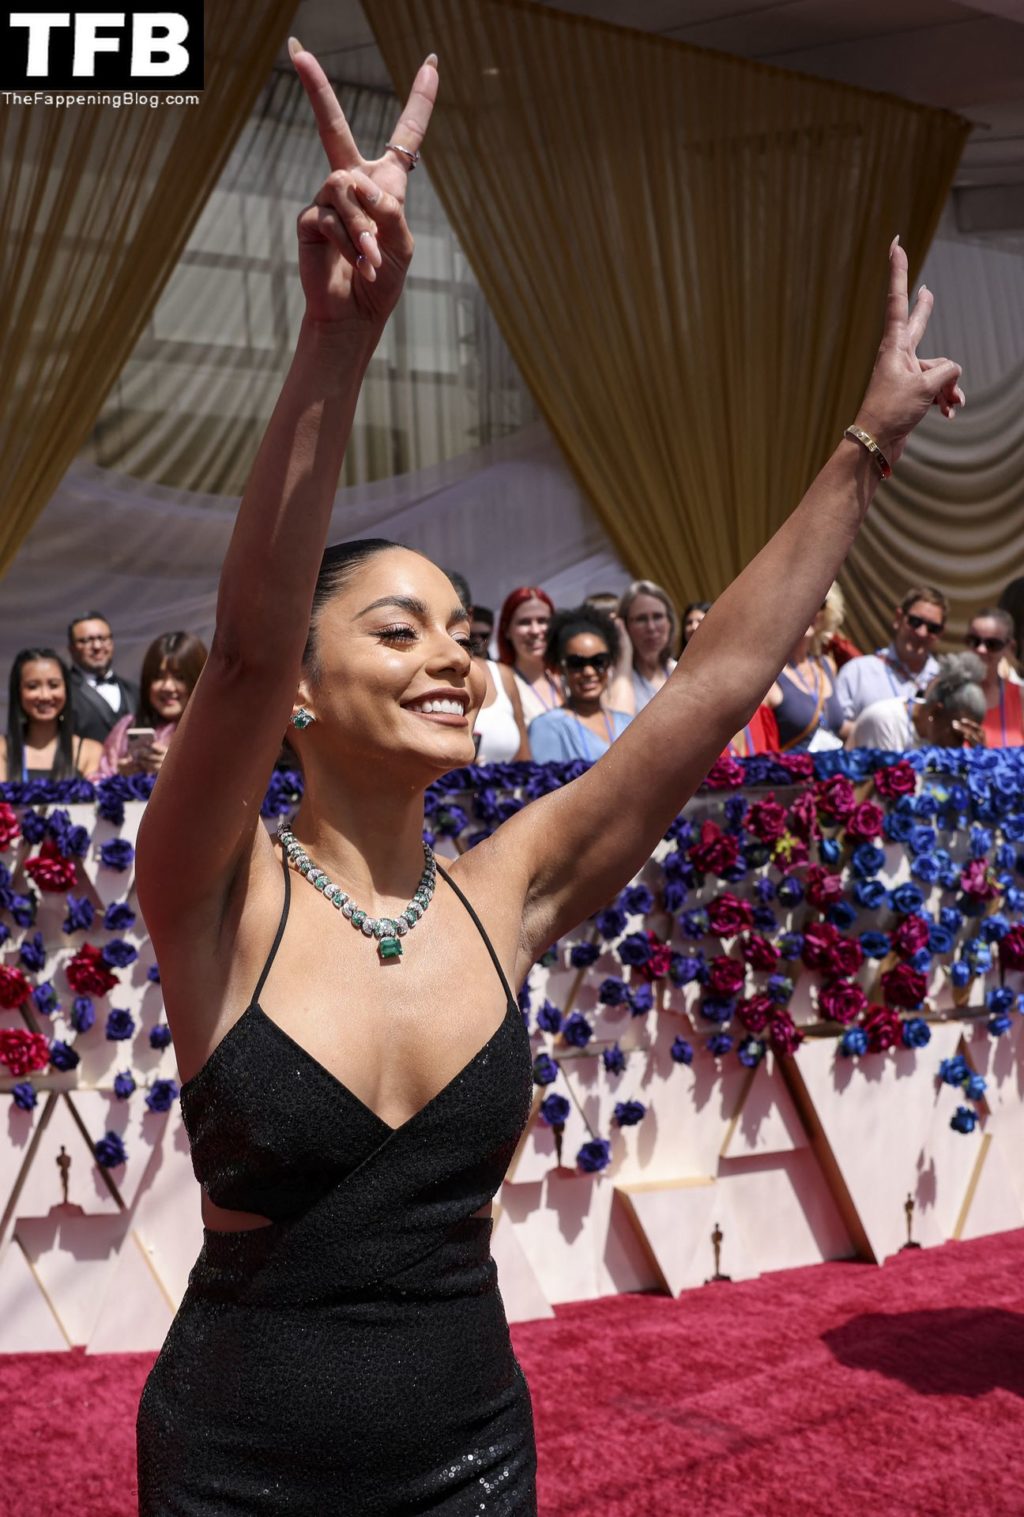 Vanessa Hudgens Sexy The Fappening Blog 14 4 1024x1517 - Vanessa Hudgens Poses on the Red Carpet at the 94th Annual Academy Awards (83 Photos)